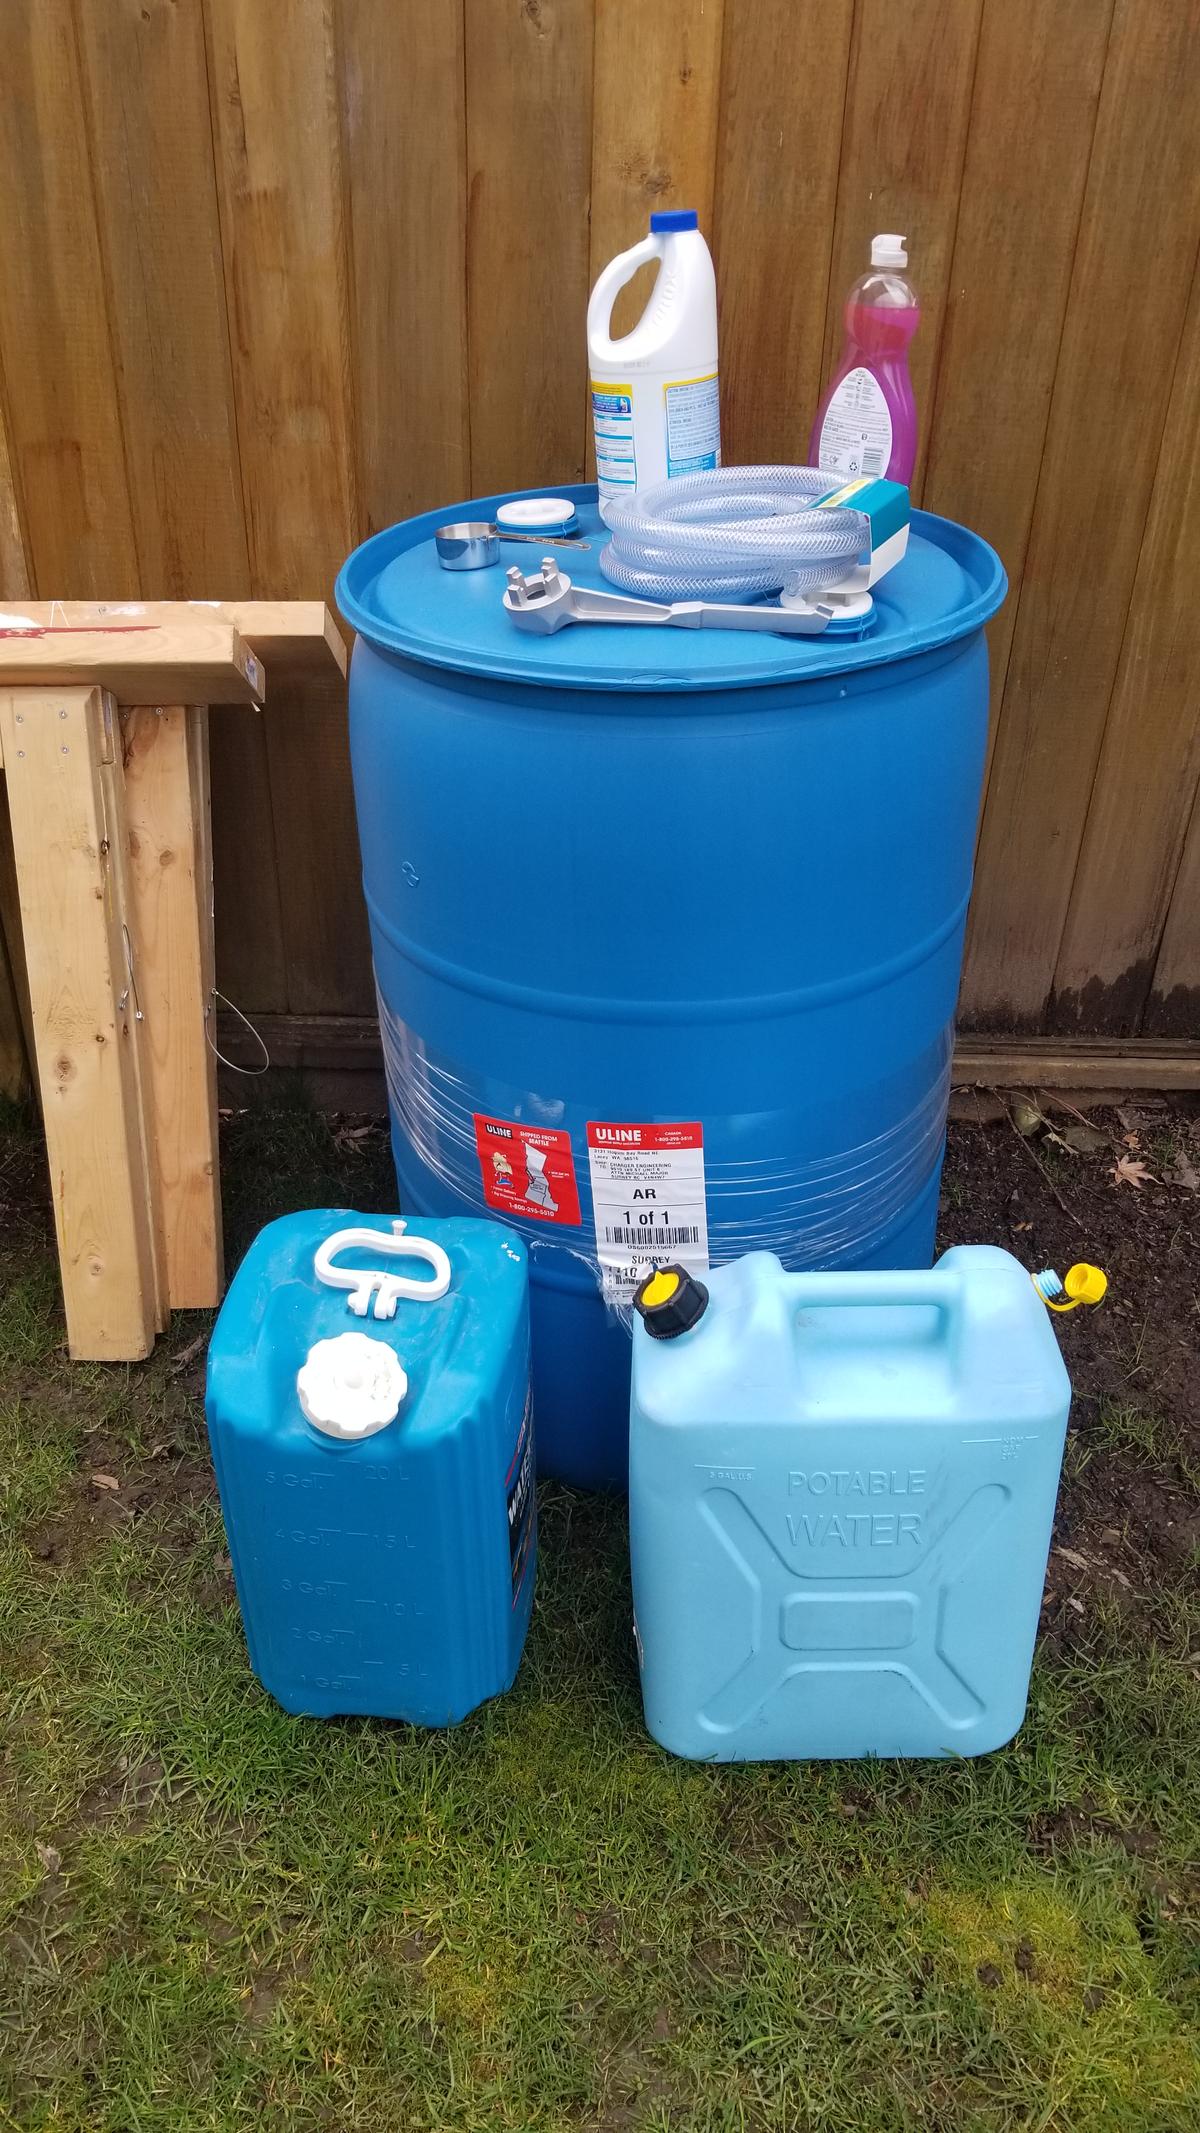 A water tank for long-term storage. (Courtesy of Michael Major)